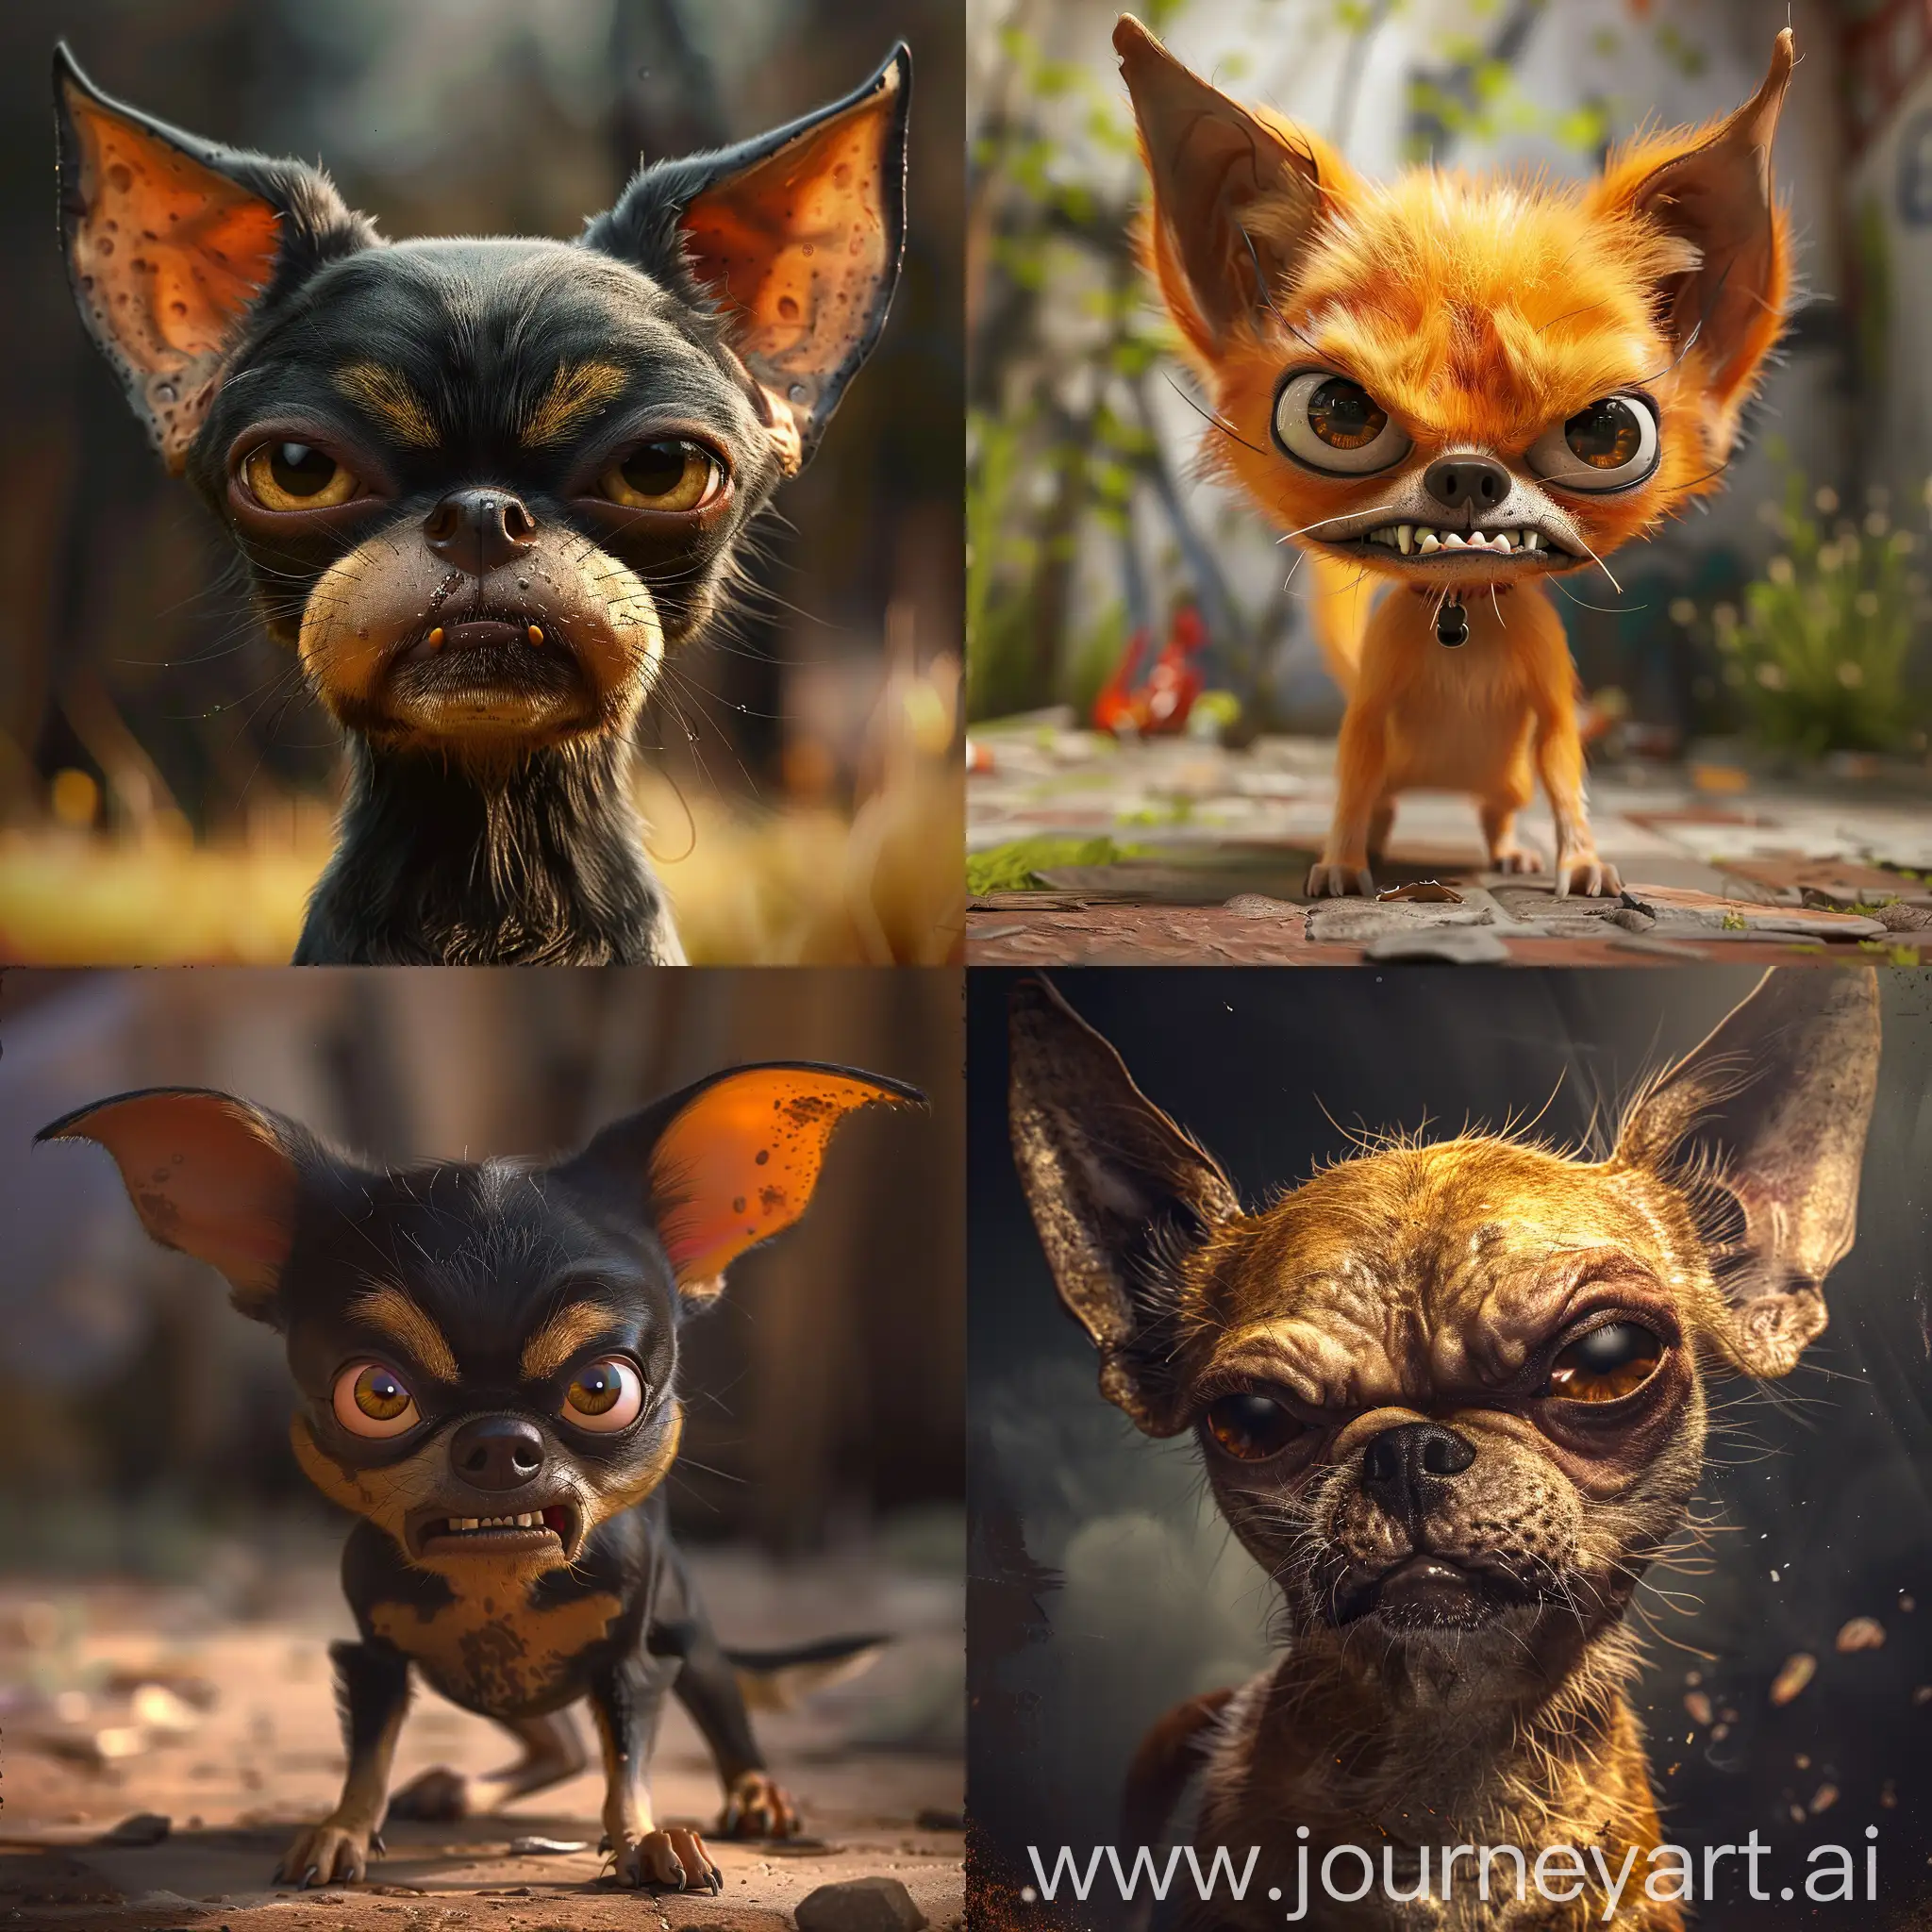 Ugly-Angry-Chihuahua-Dog-Cartoon-in-4K-HDR-Realistic-Style